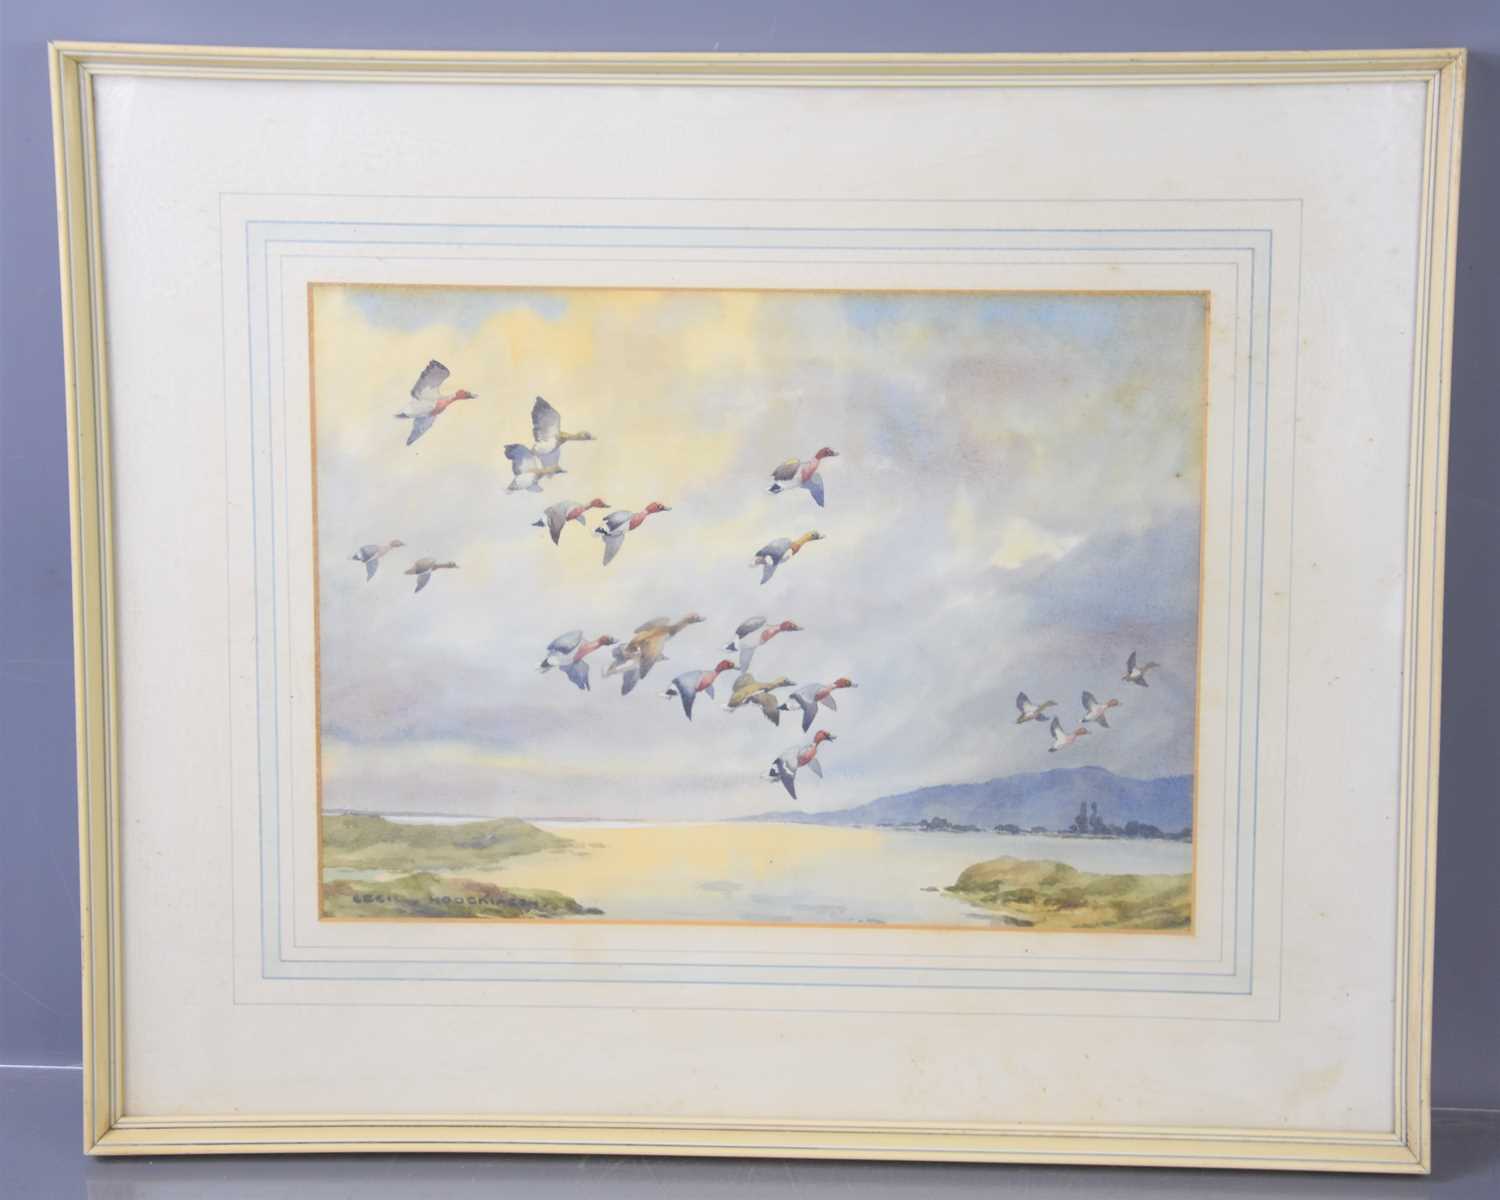 Cecil Thomas Hodgkinson (1895-1979) "Wigeon Alighting" watercolour, signed and framed.